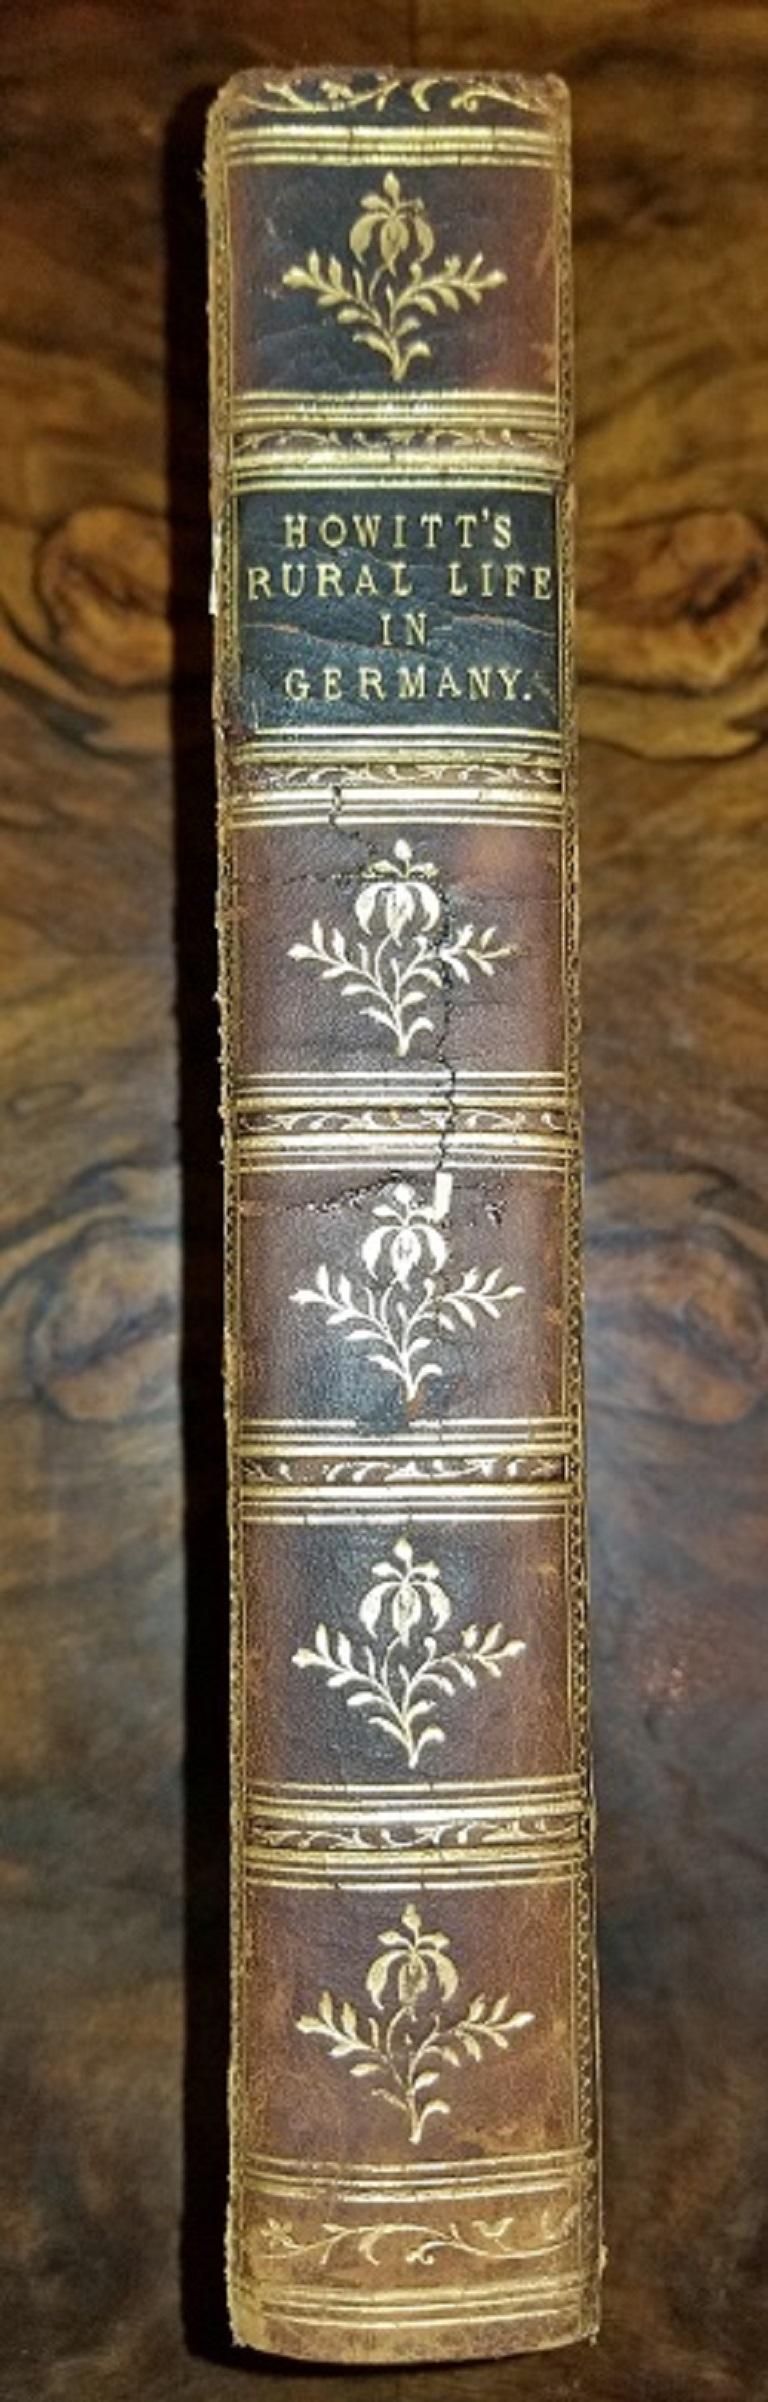 Rural and Domestic Life of Germany by Howitt, 1842 For Sale 2